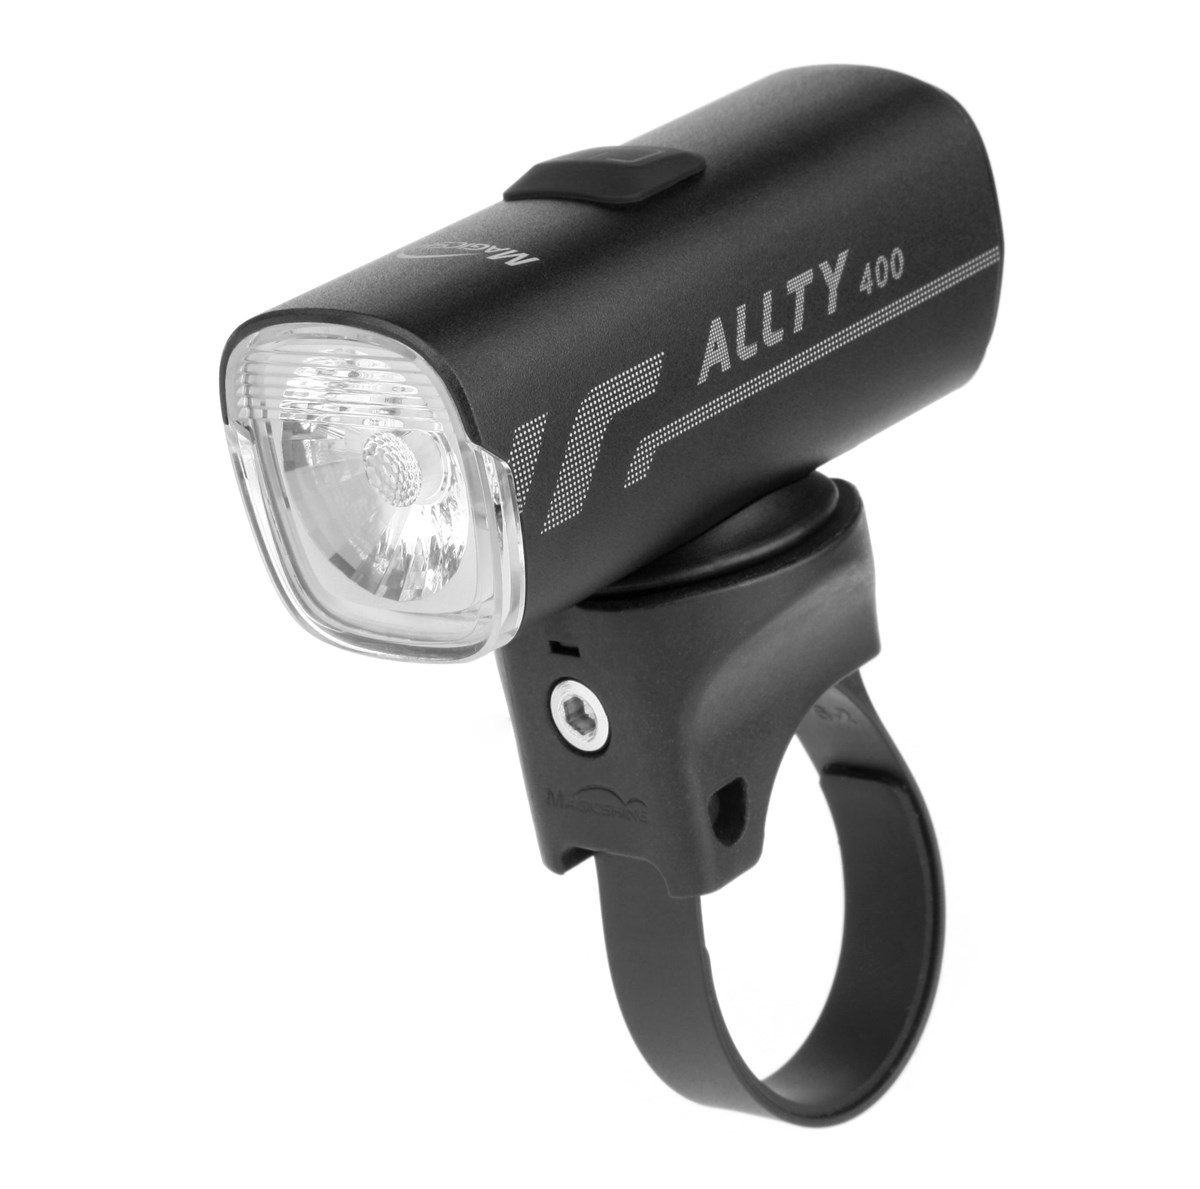 Magicshine Allty 400 Front Light product image